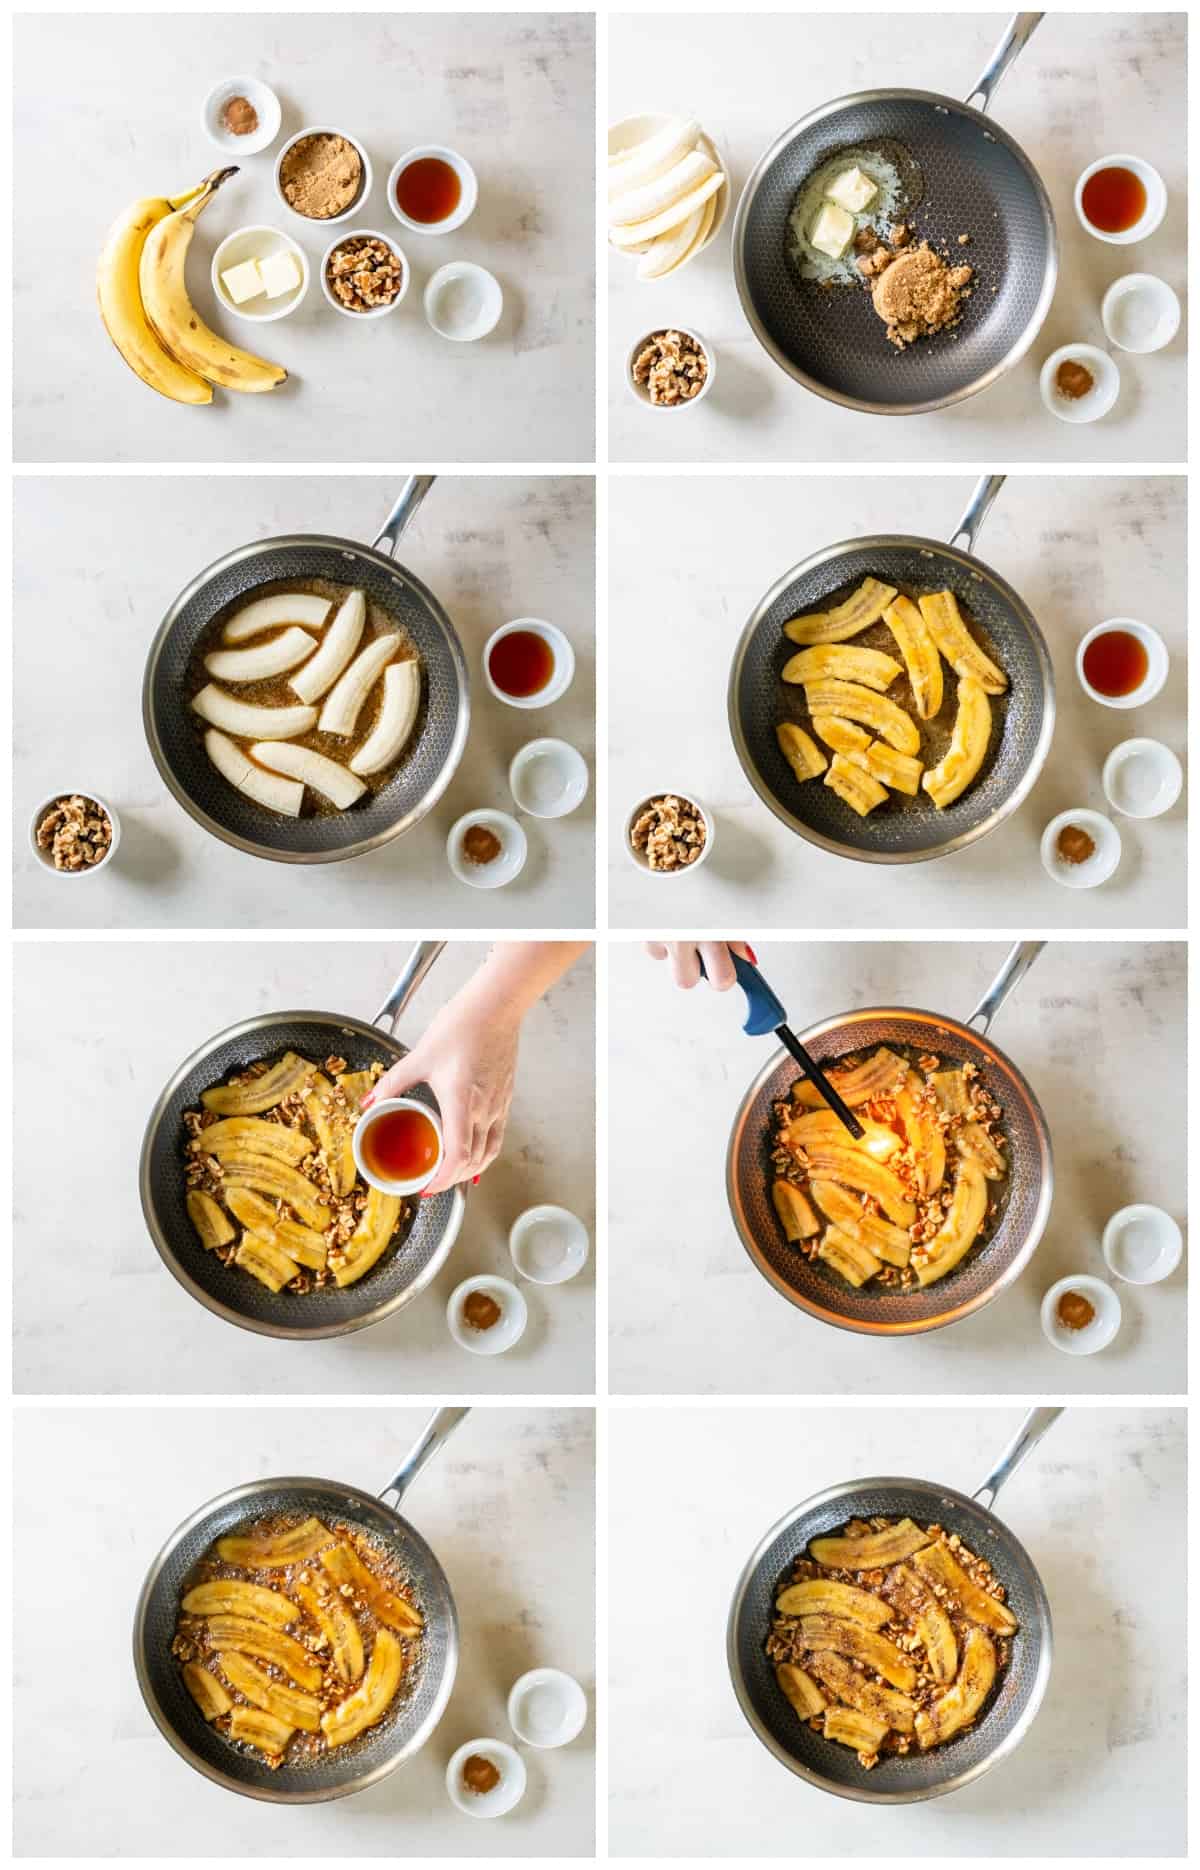 how to make bananas foster step by step photo instructions 